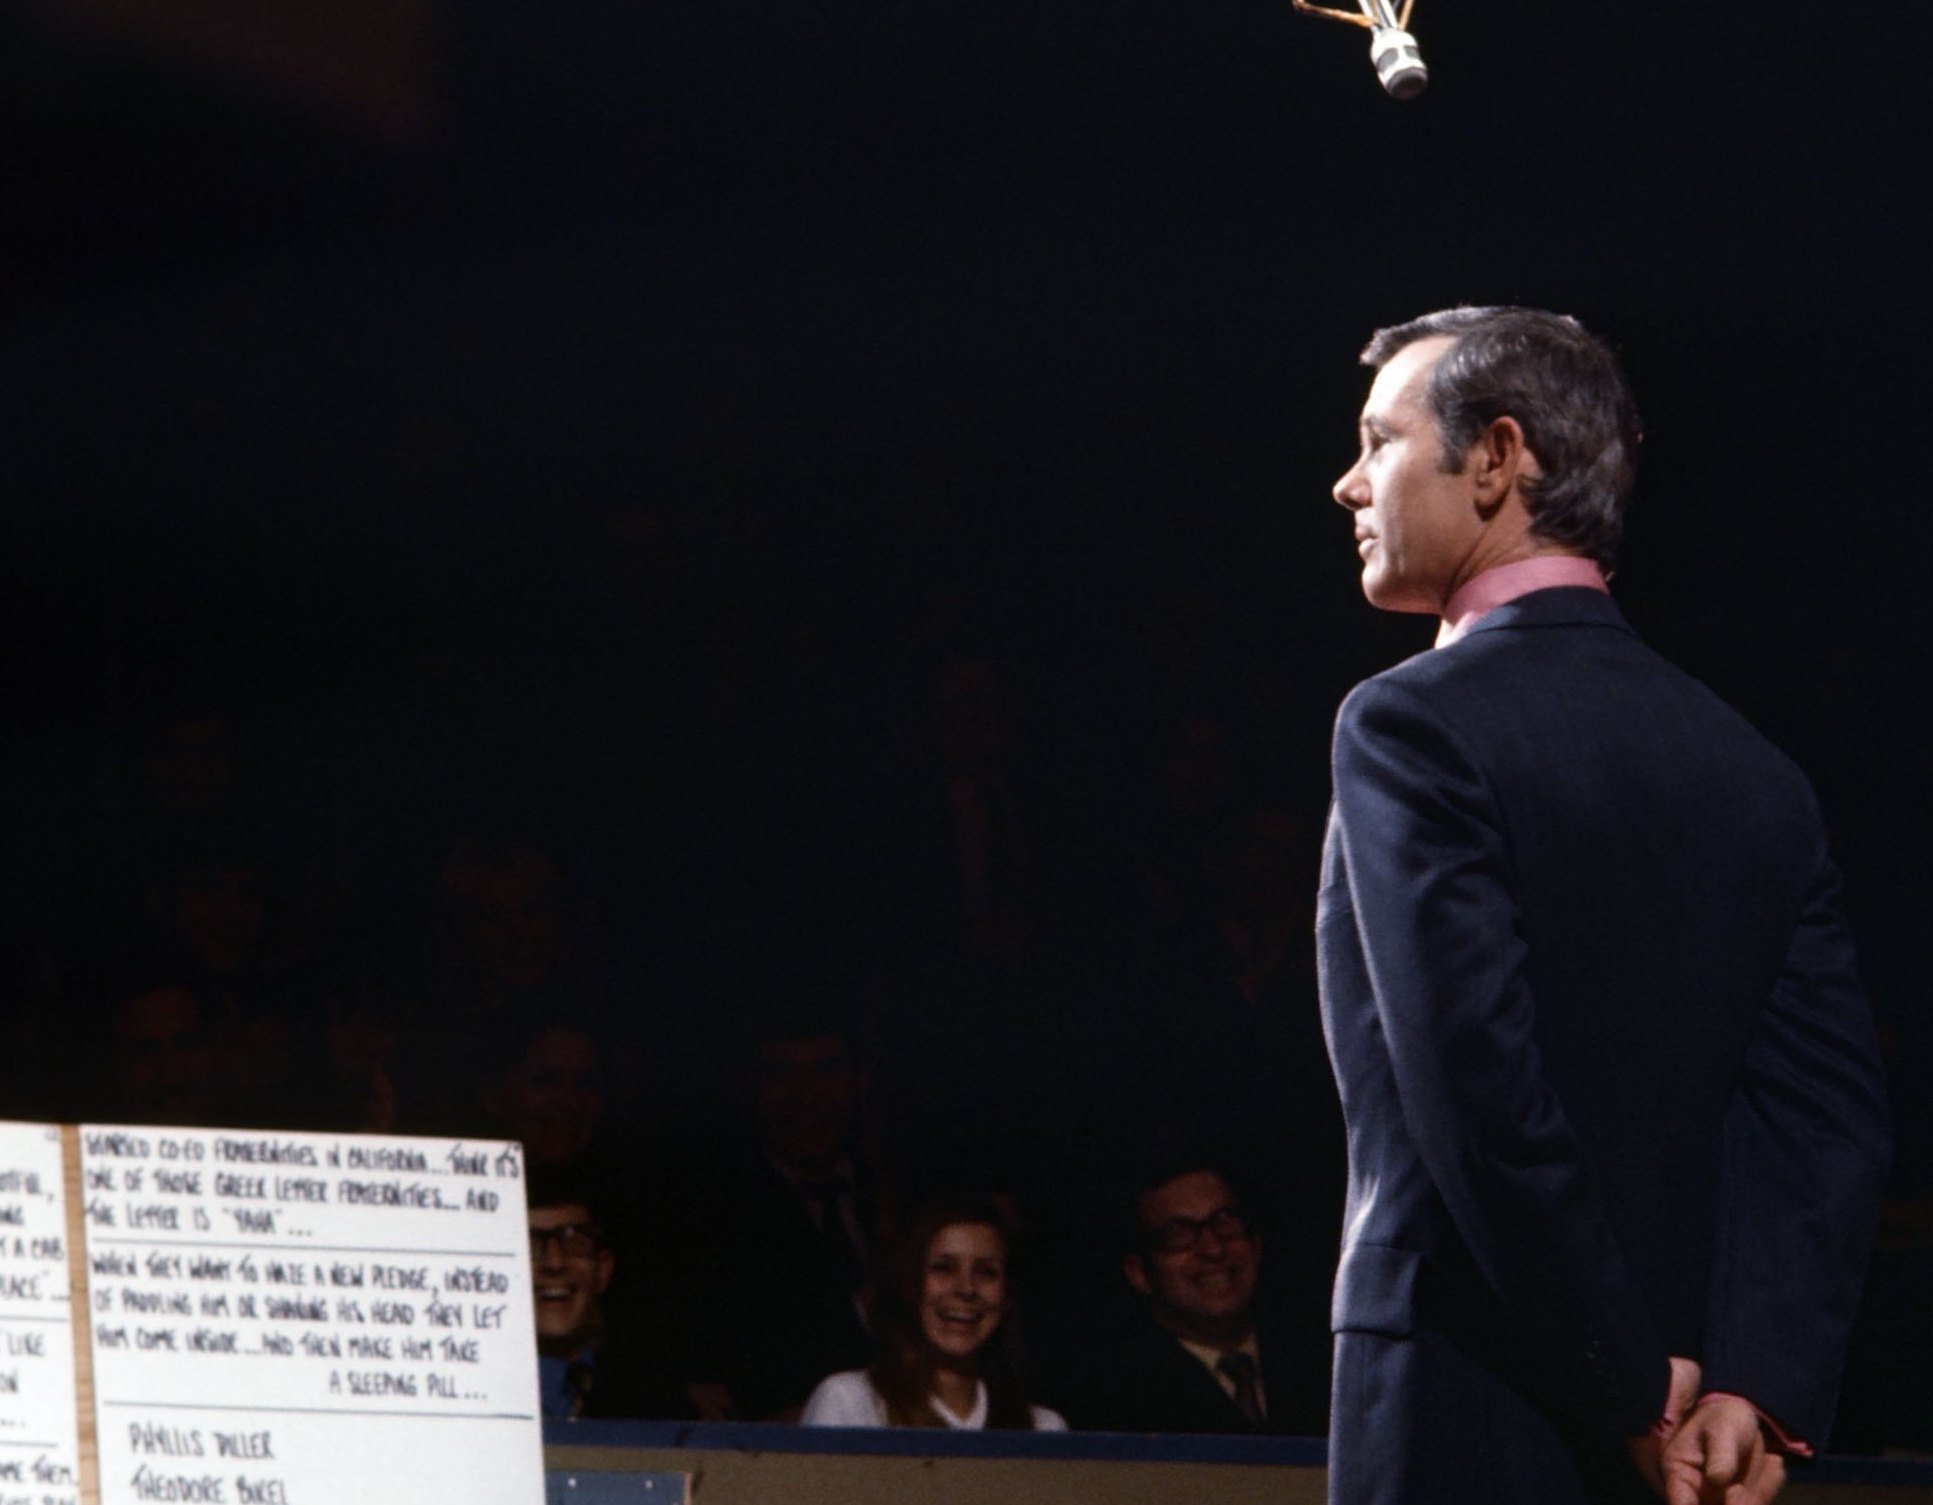 Johnny Carson hosts 'The Tonight Show' in 1970, dressed in a suit and standing with his hands behind his back